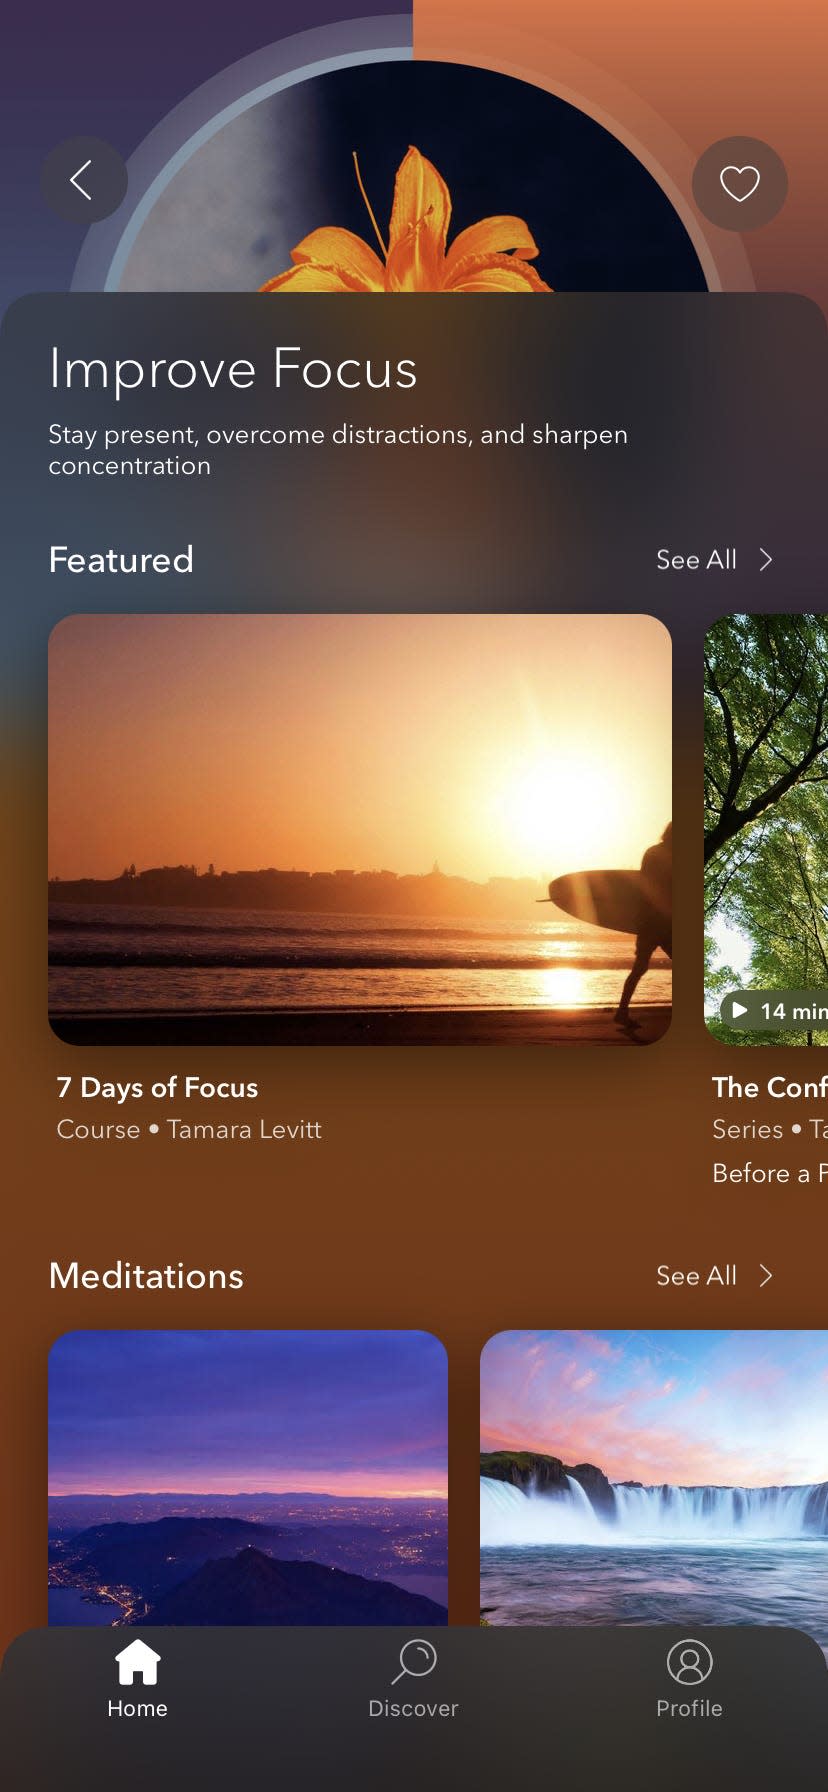 thumbnail images of focus-promoting meditations in a screenshot of the meditation app Calm